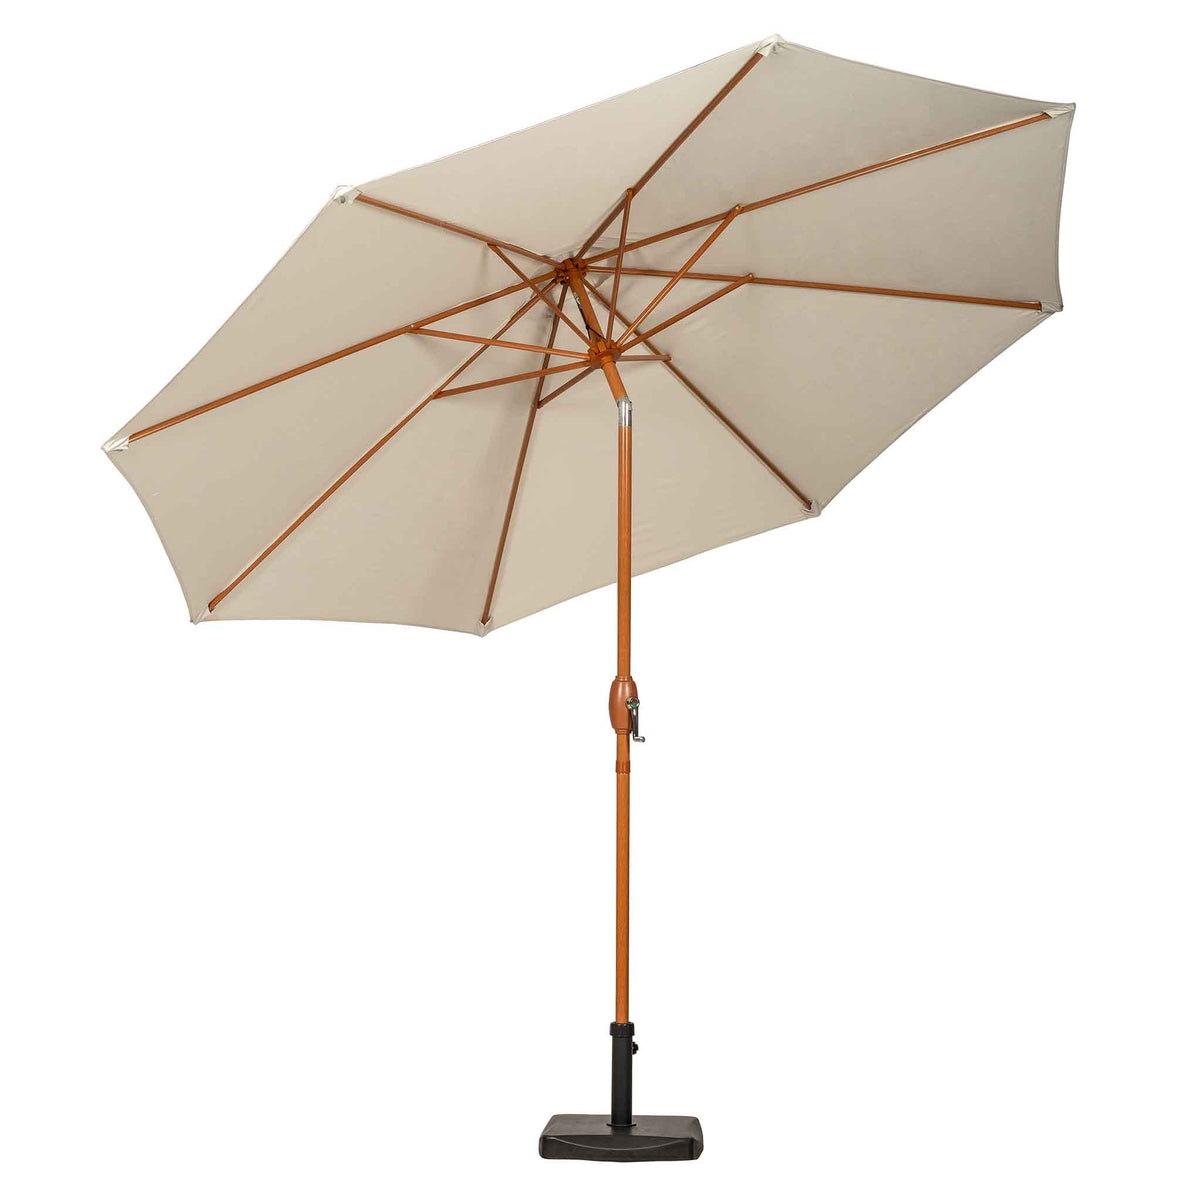 Ivory or Green 3m Crank & Tilt Canopy, Wood Look Frame, Large Round Outdoor Cream Umbrella for Garden Patio Sets Roseland Furniture